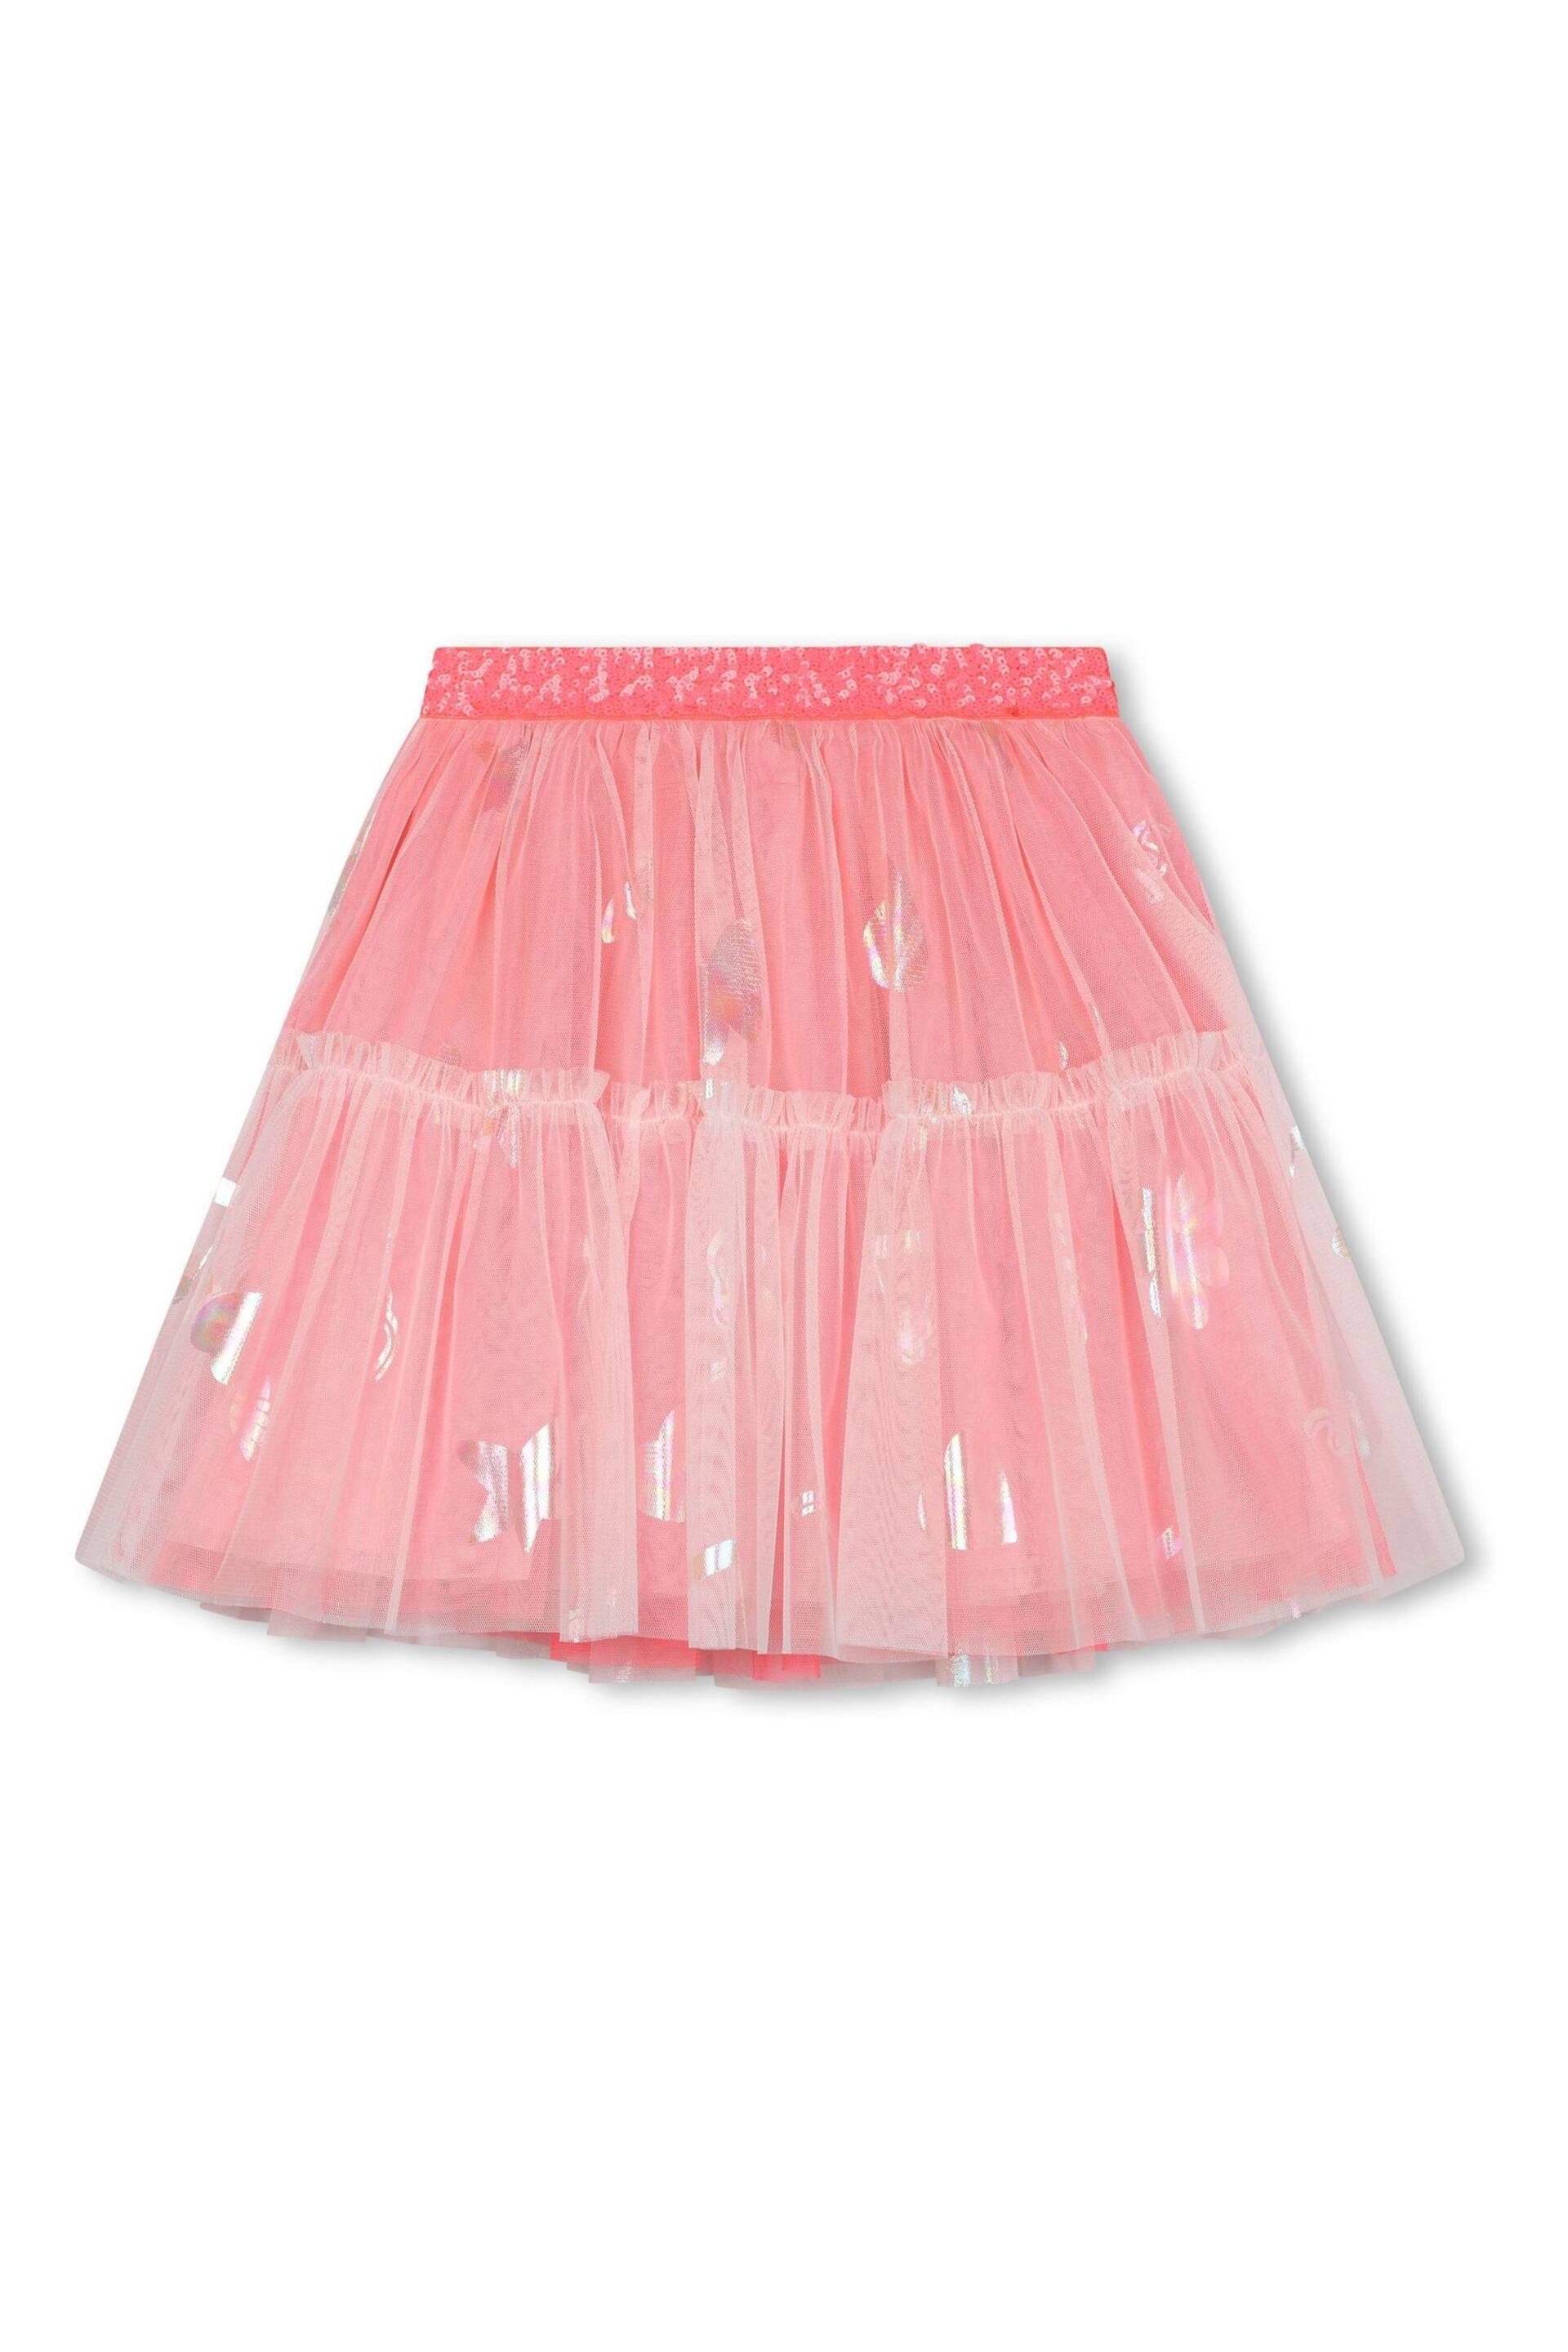 Billieblush Pink Double Layer Mesh Sequin Skirt - Image 2 of 3